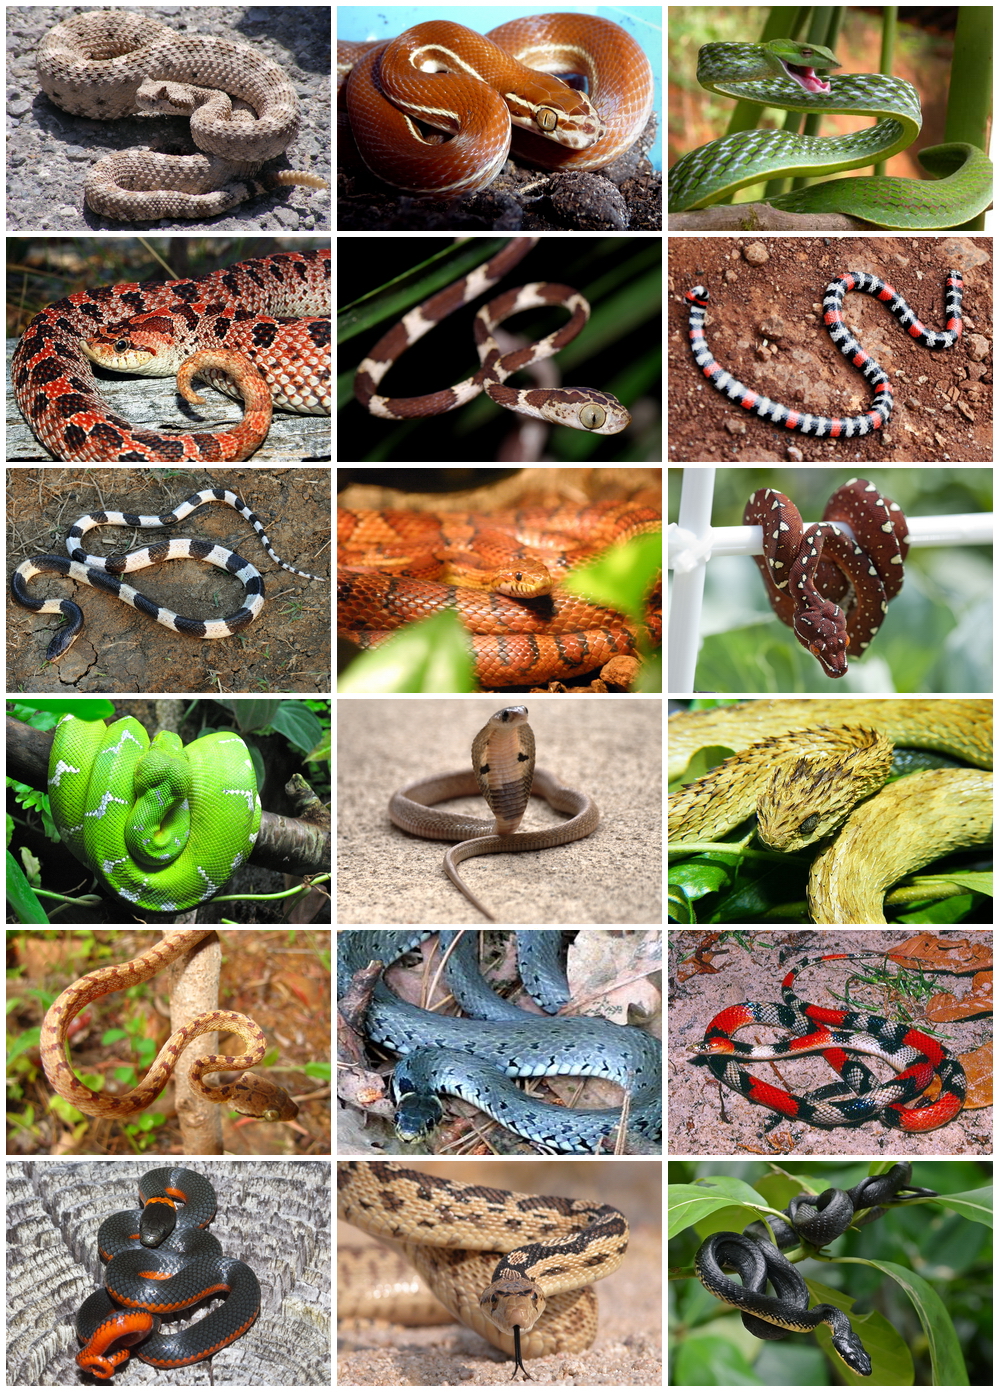 How many different types of snakes are there?